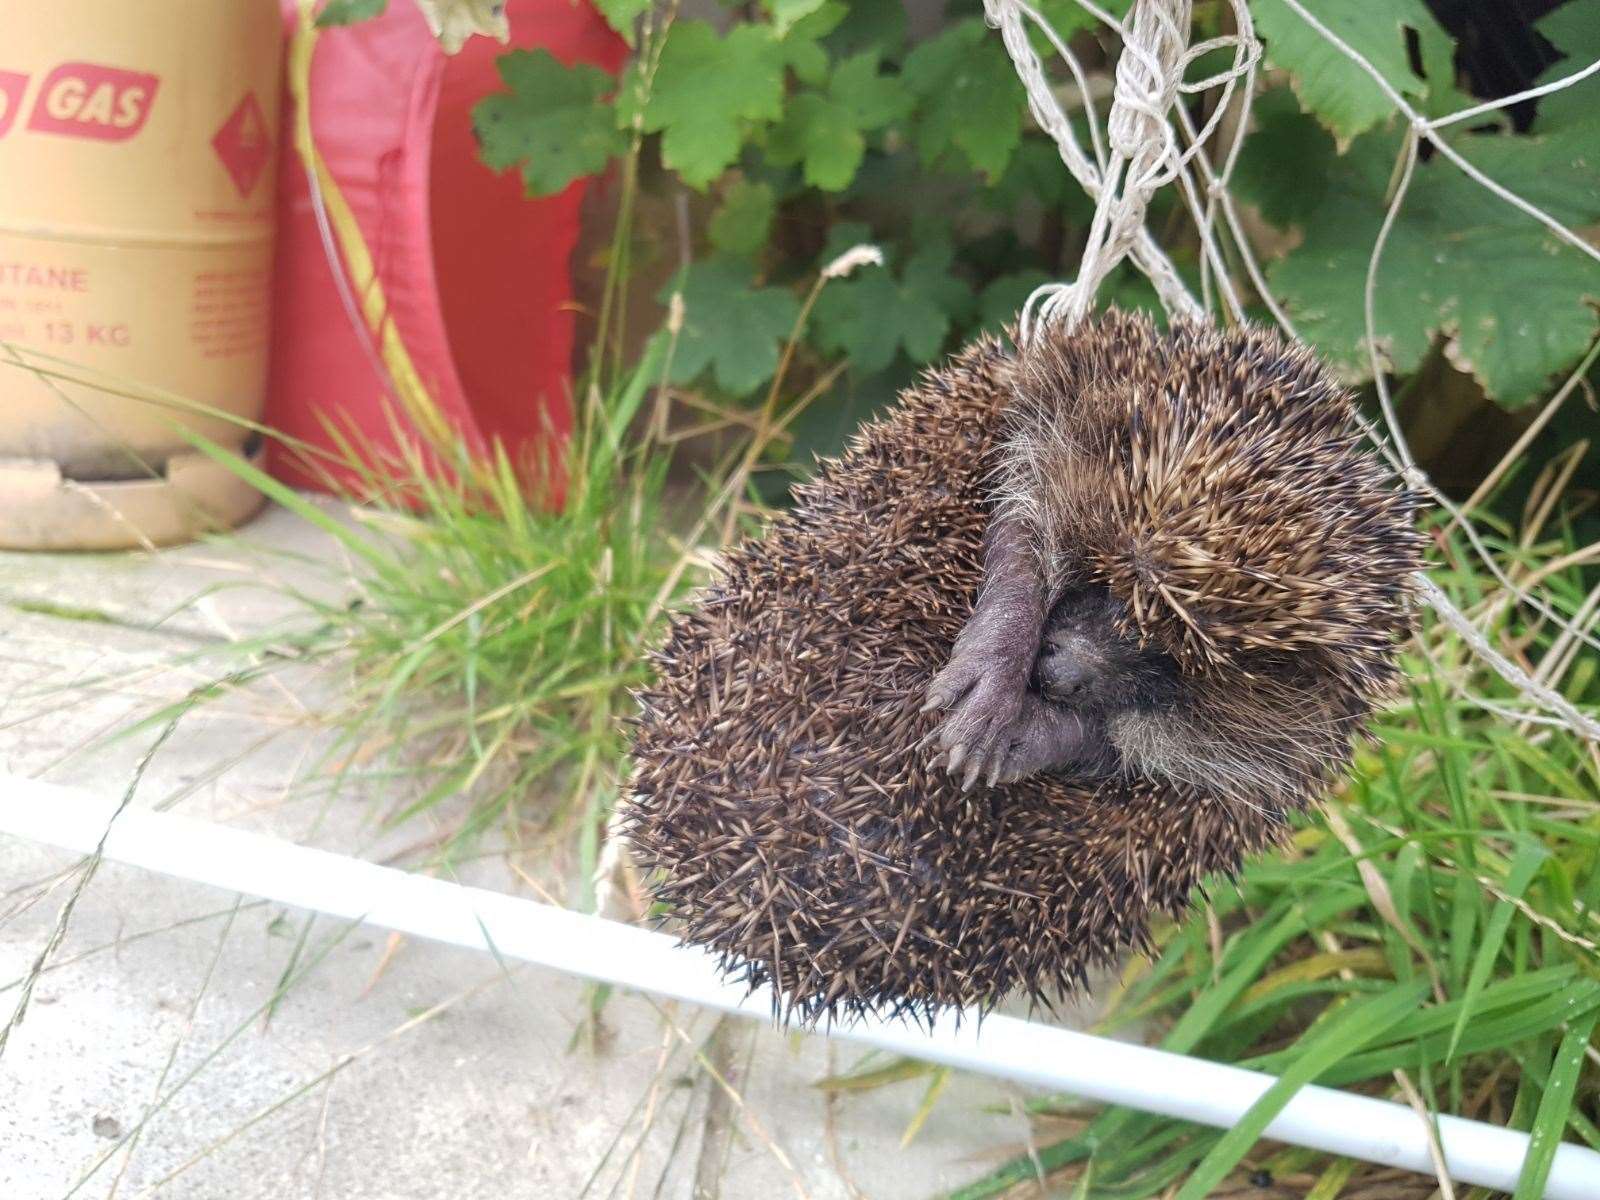 The RSPCA warn this is 'hectic hedgehog' month